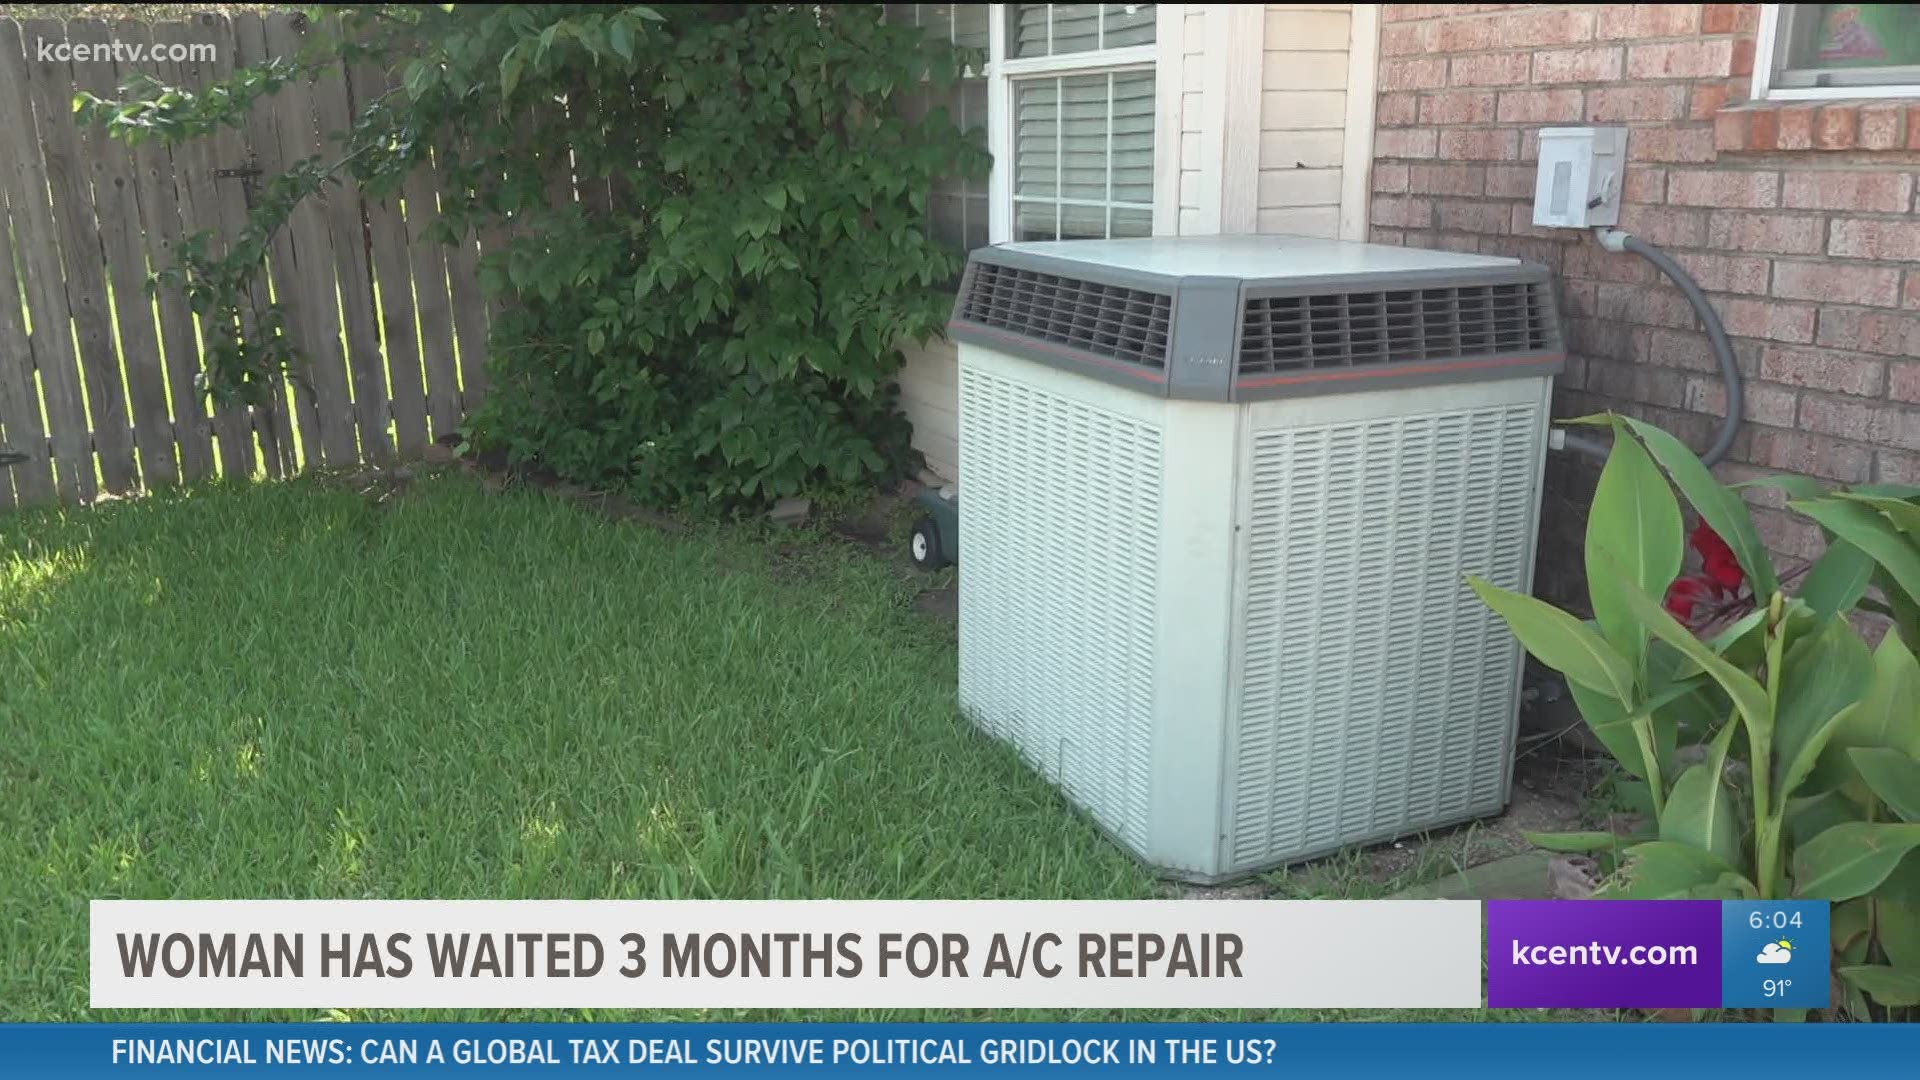 Brenda Martin has been struggling to keep cool for months as she's called and waited for A/C repairs. After 6 News stepped in, the part needed was found within hours